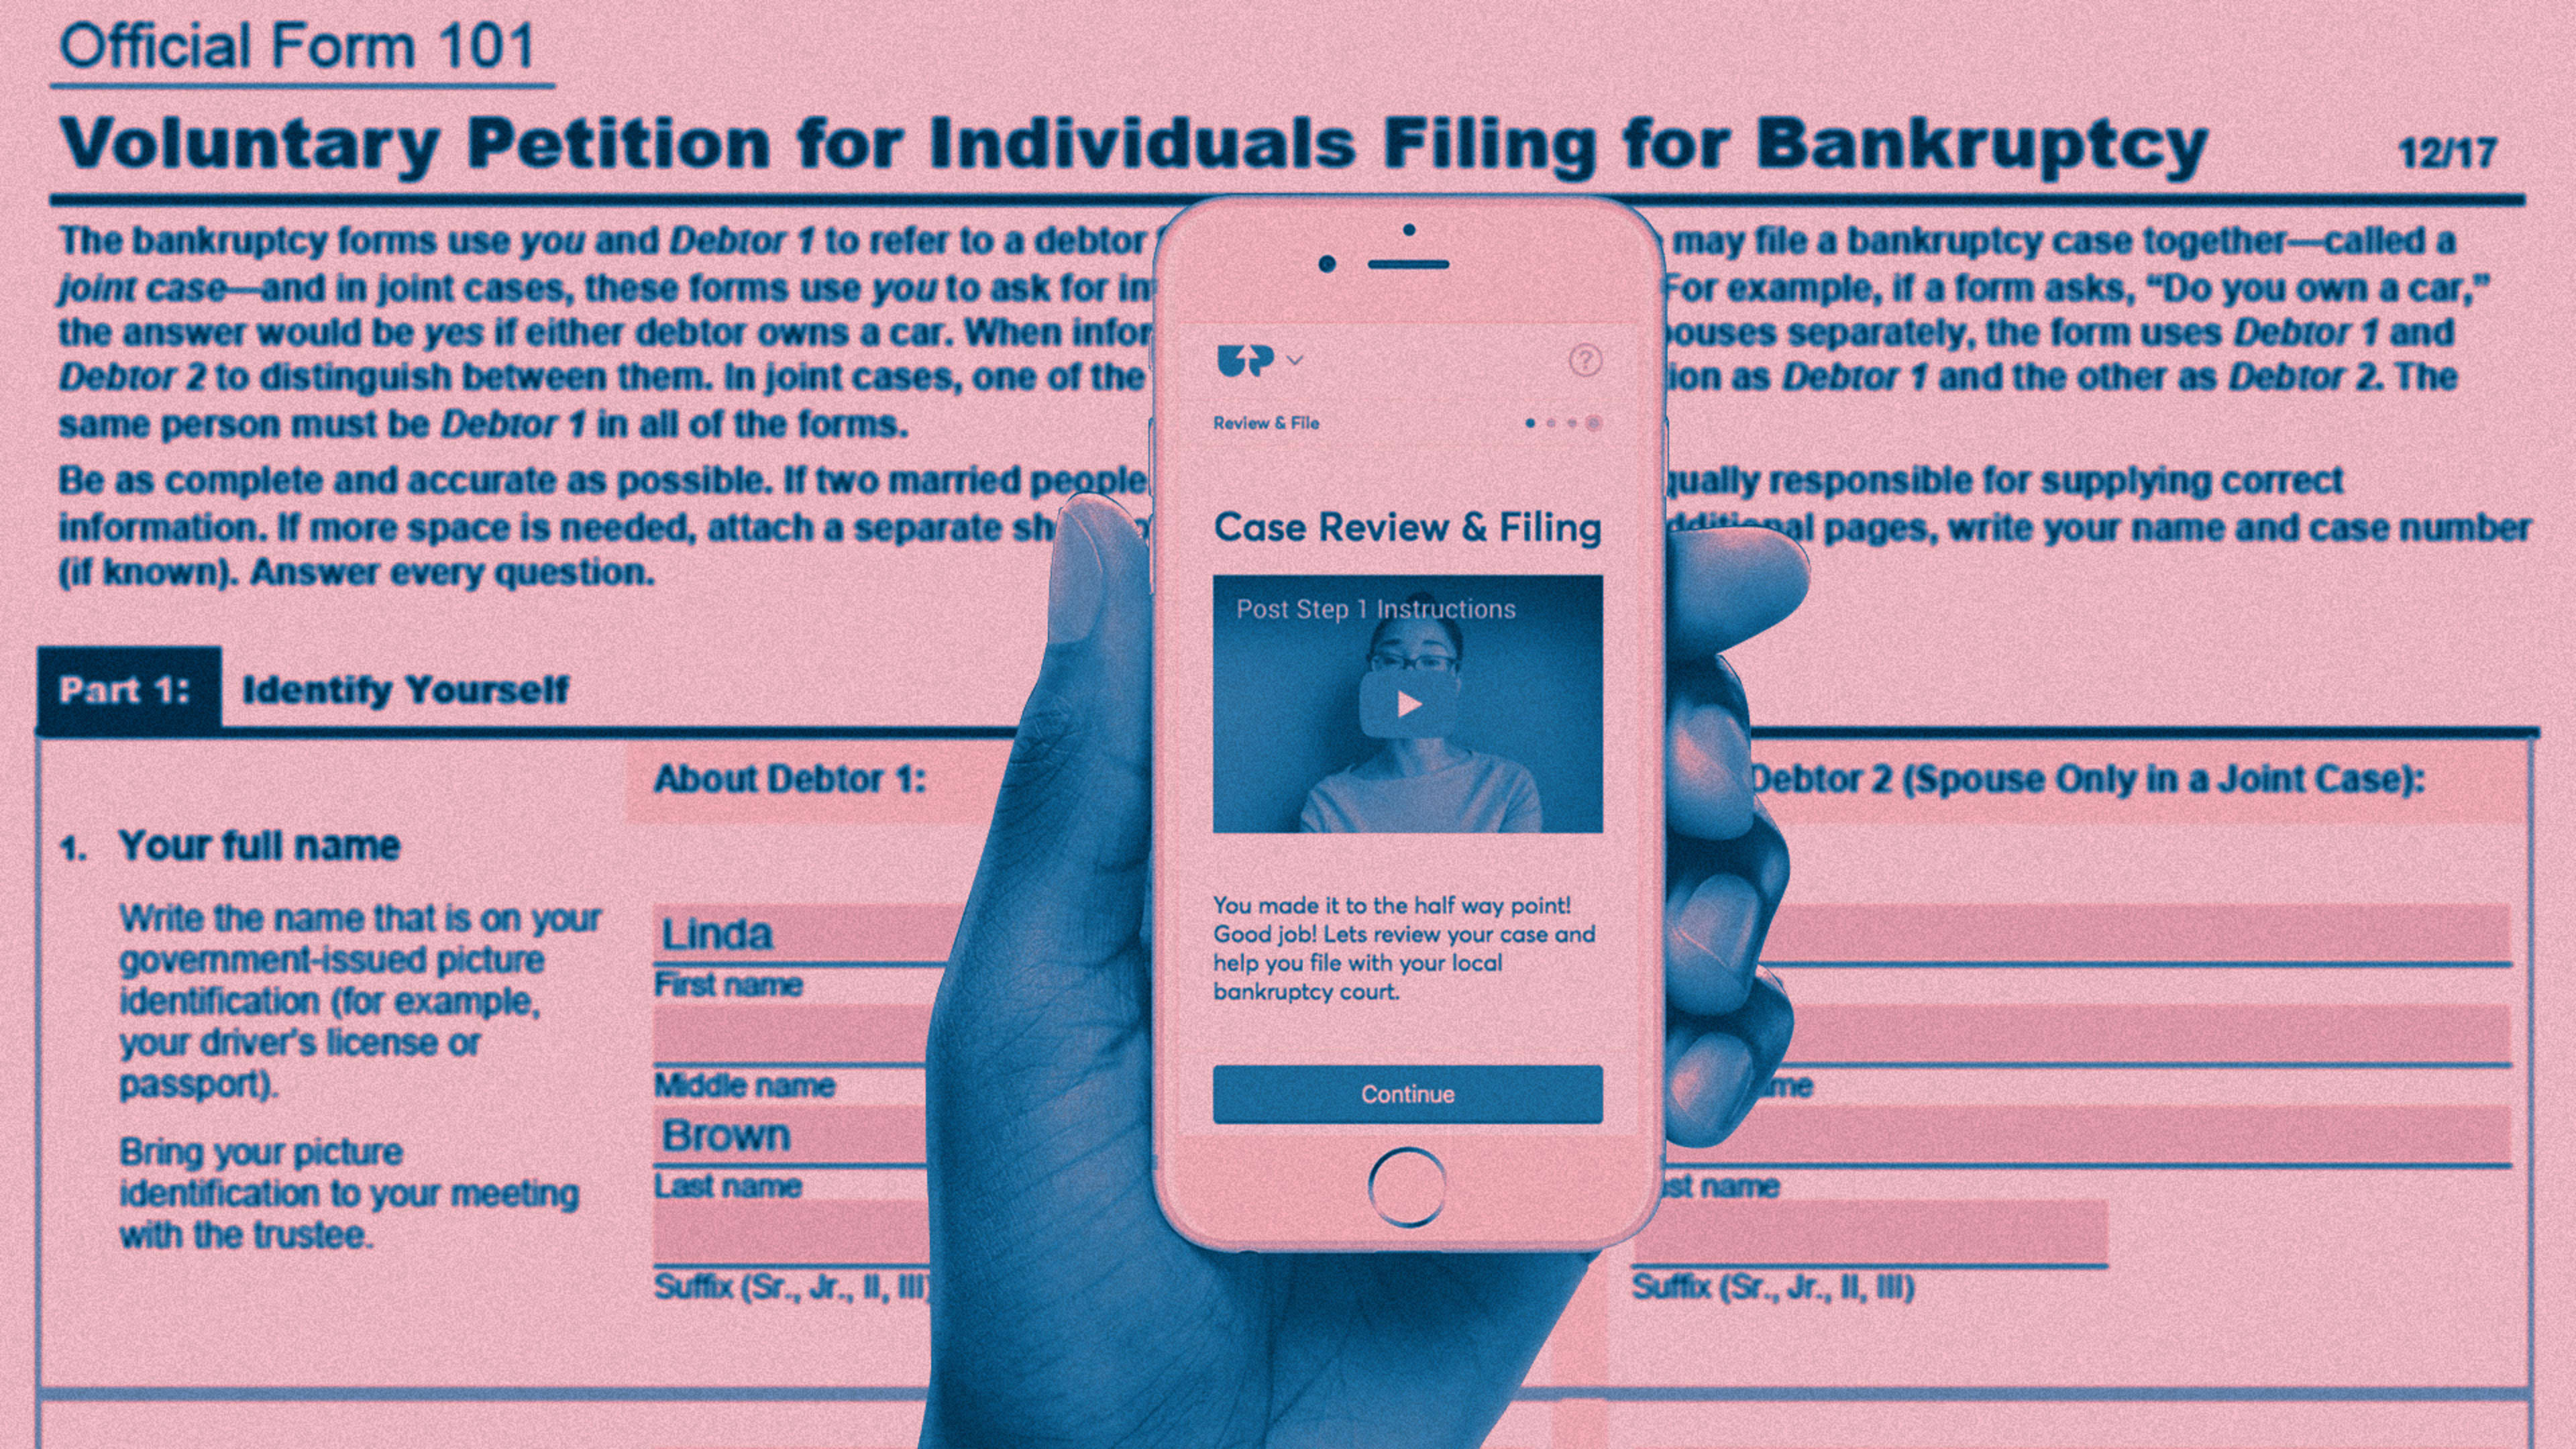 This free software automates bankruptcy to help people clear their debts